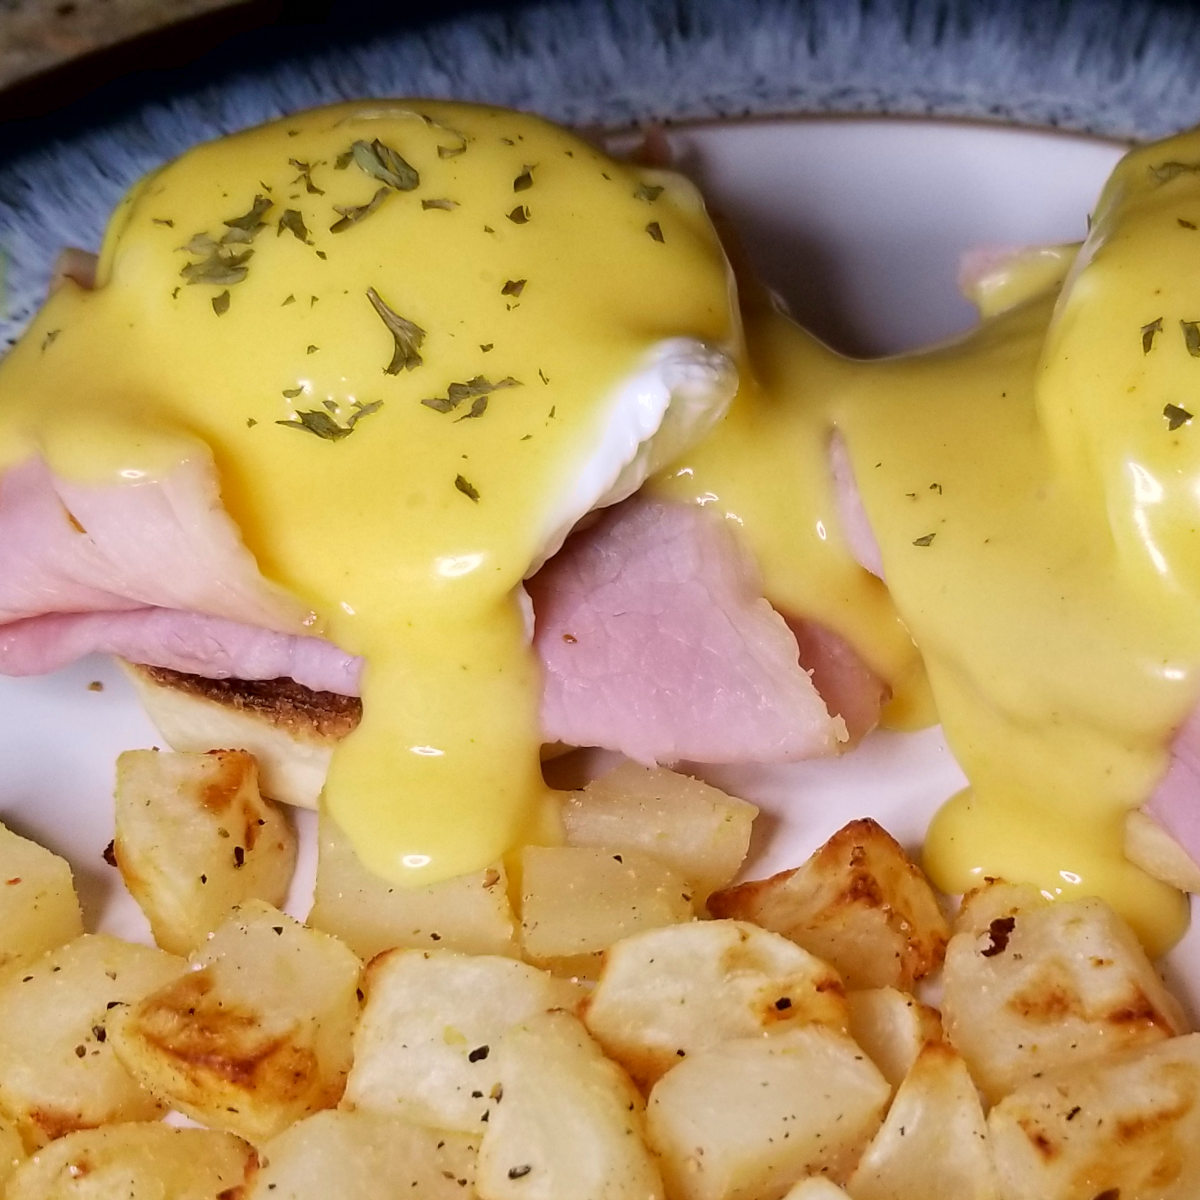 Eggs benedict with hollandaise oozing onto some home fries